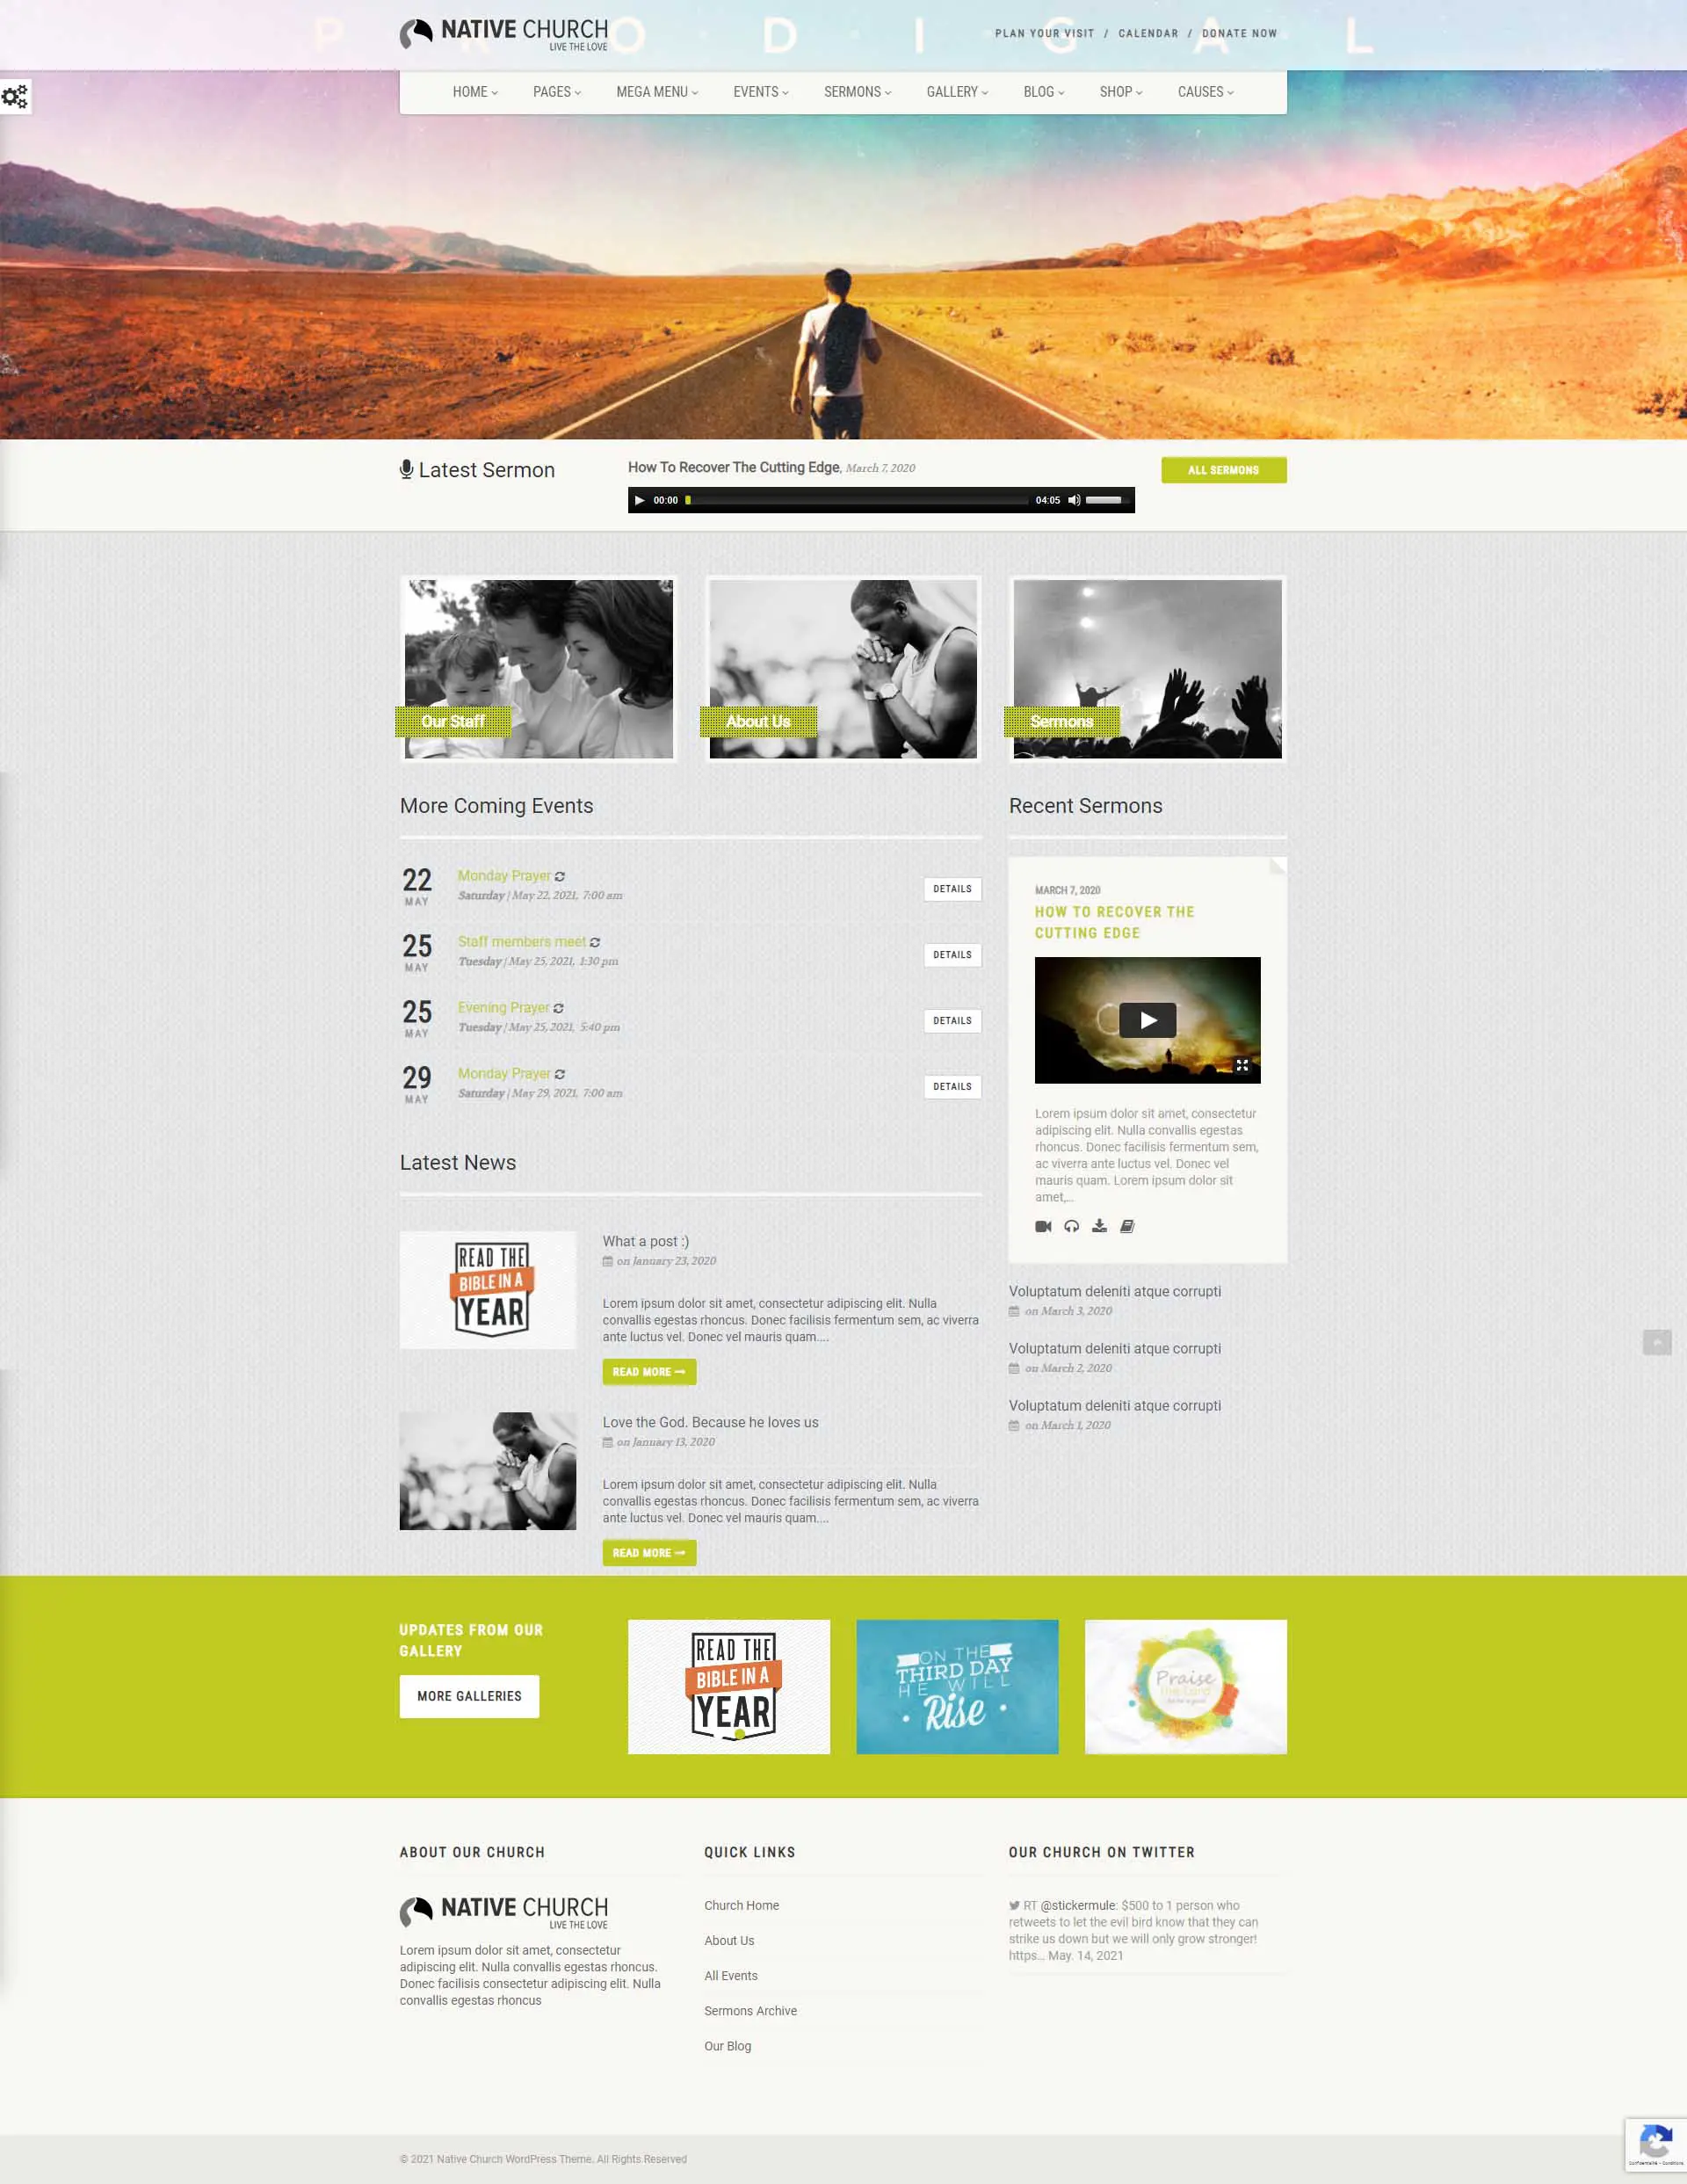 NativeChurch : Template wordpress pour ONG